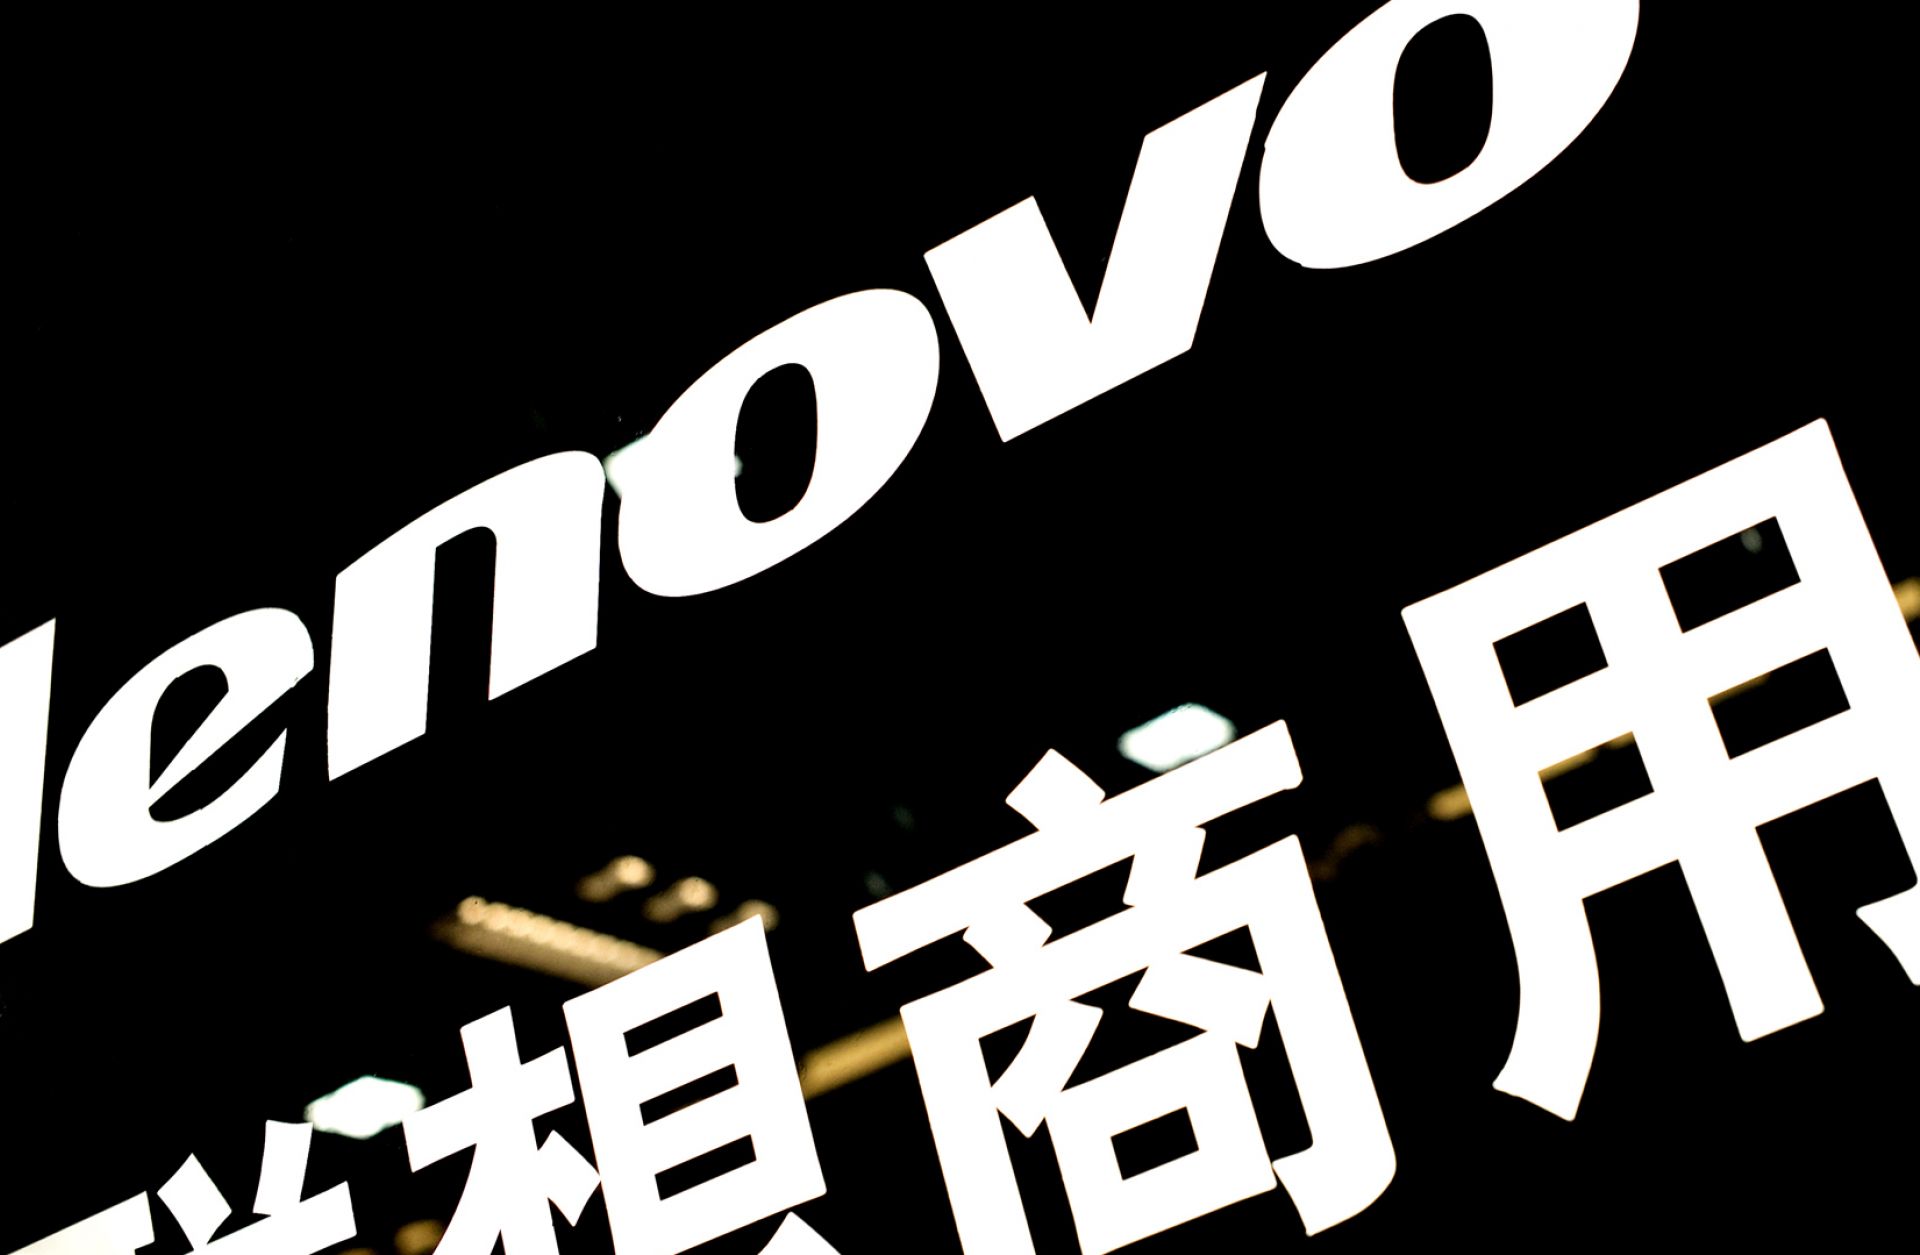 The Lenovo logo is displayed at a computer center in Shanghai.